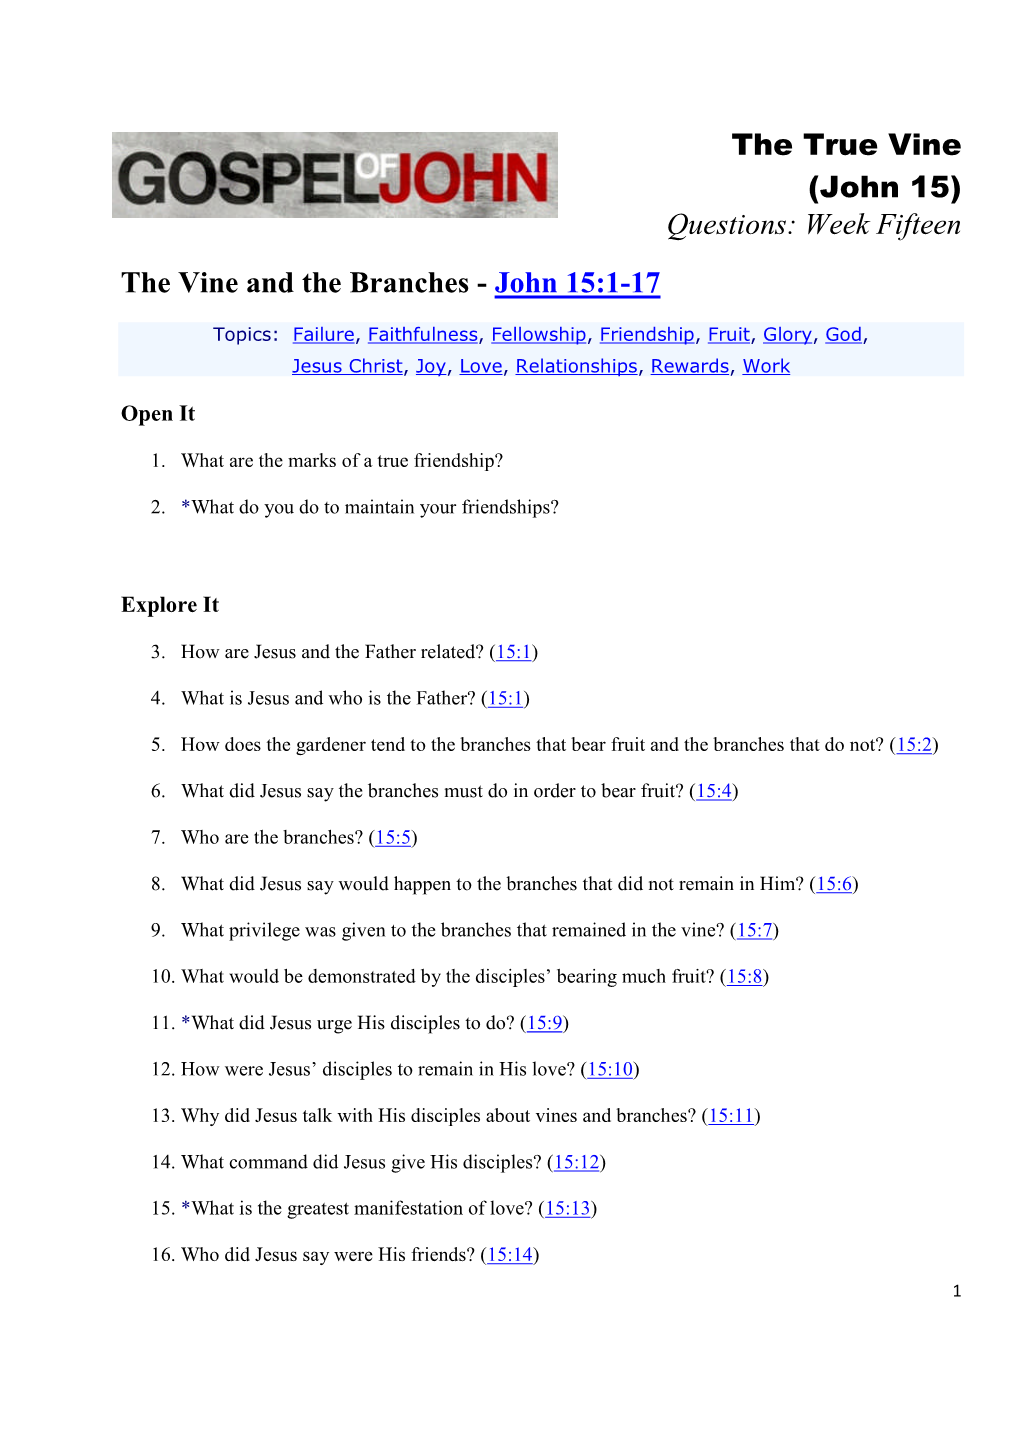 Questions: Week Fifteen the Vine and the Branches - John 15:1-17